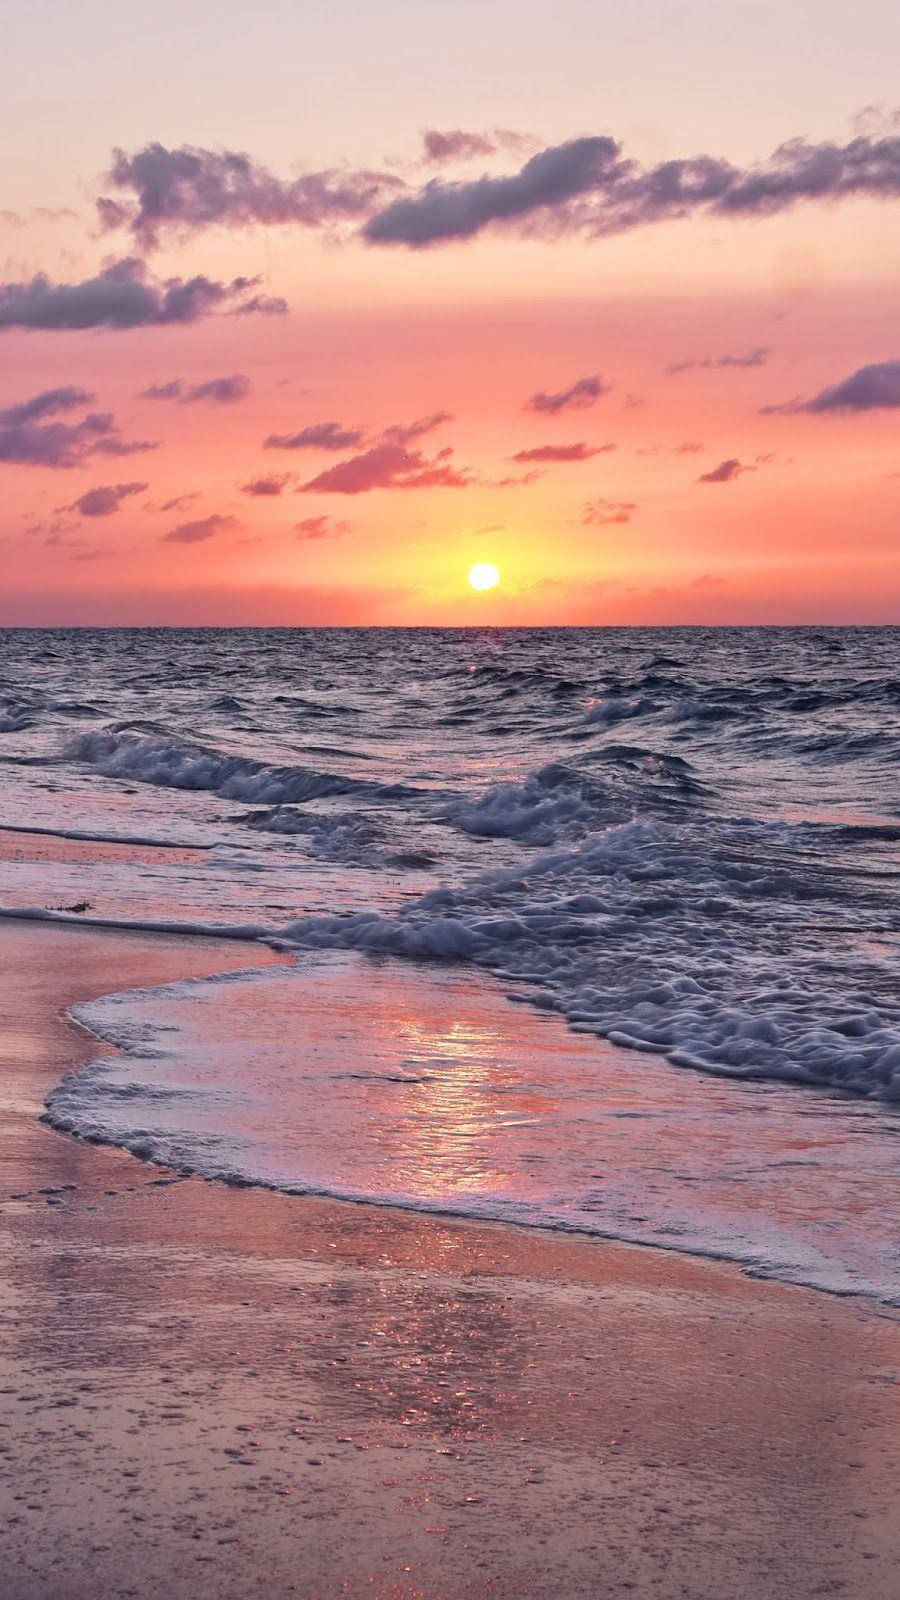 Beach Shore With Aesthetic Sunset Wallpaper